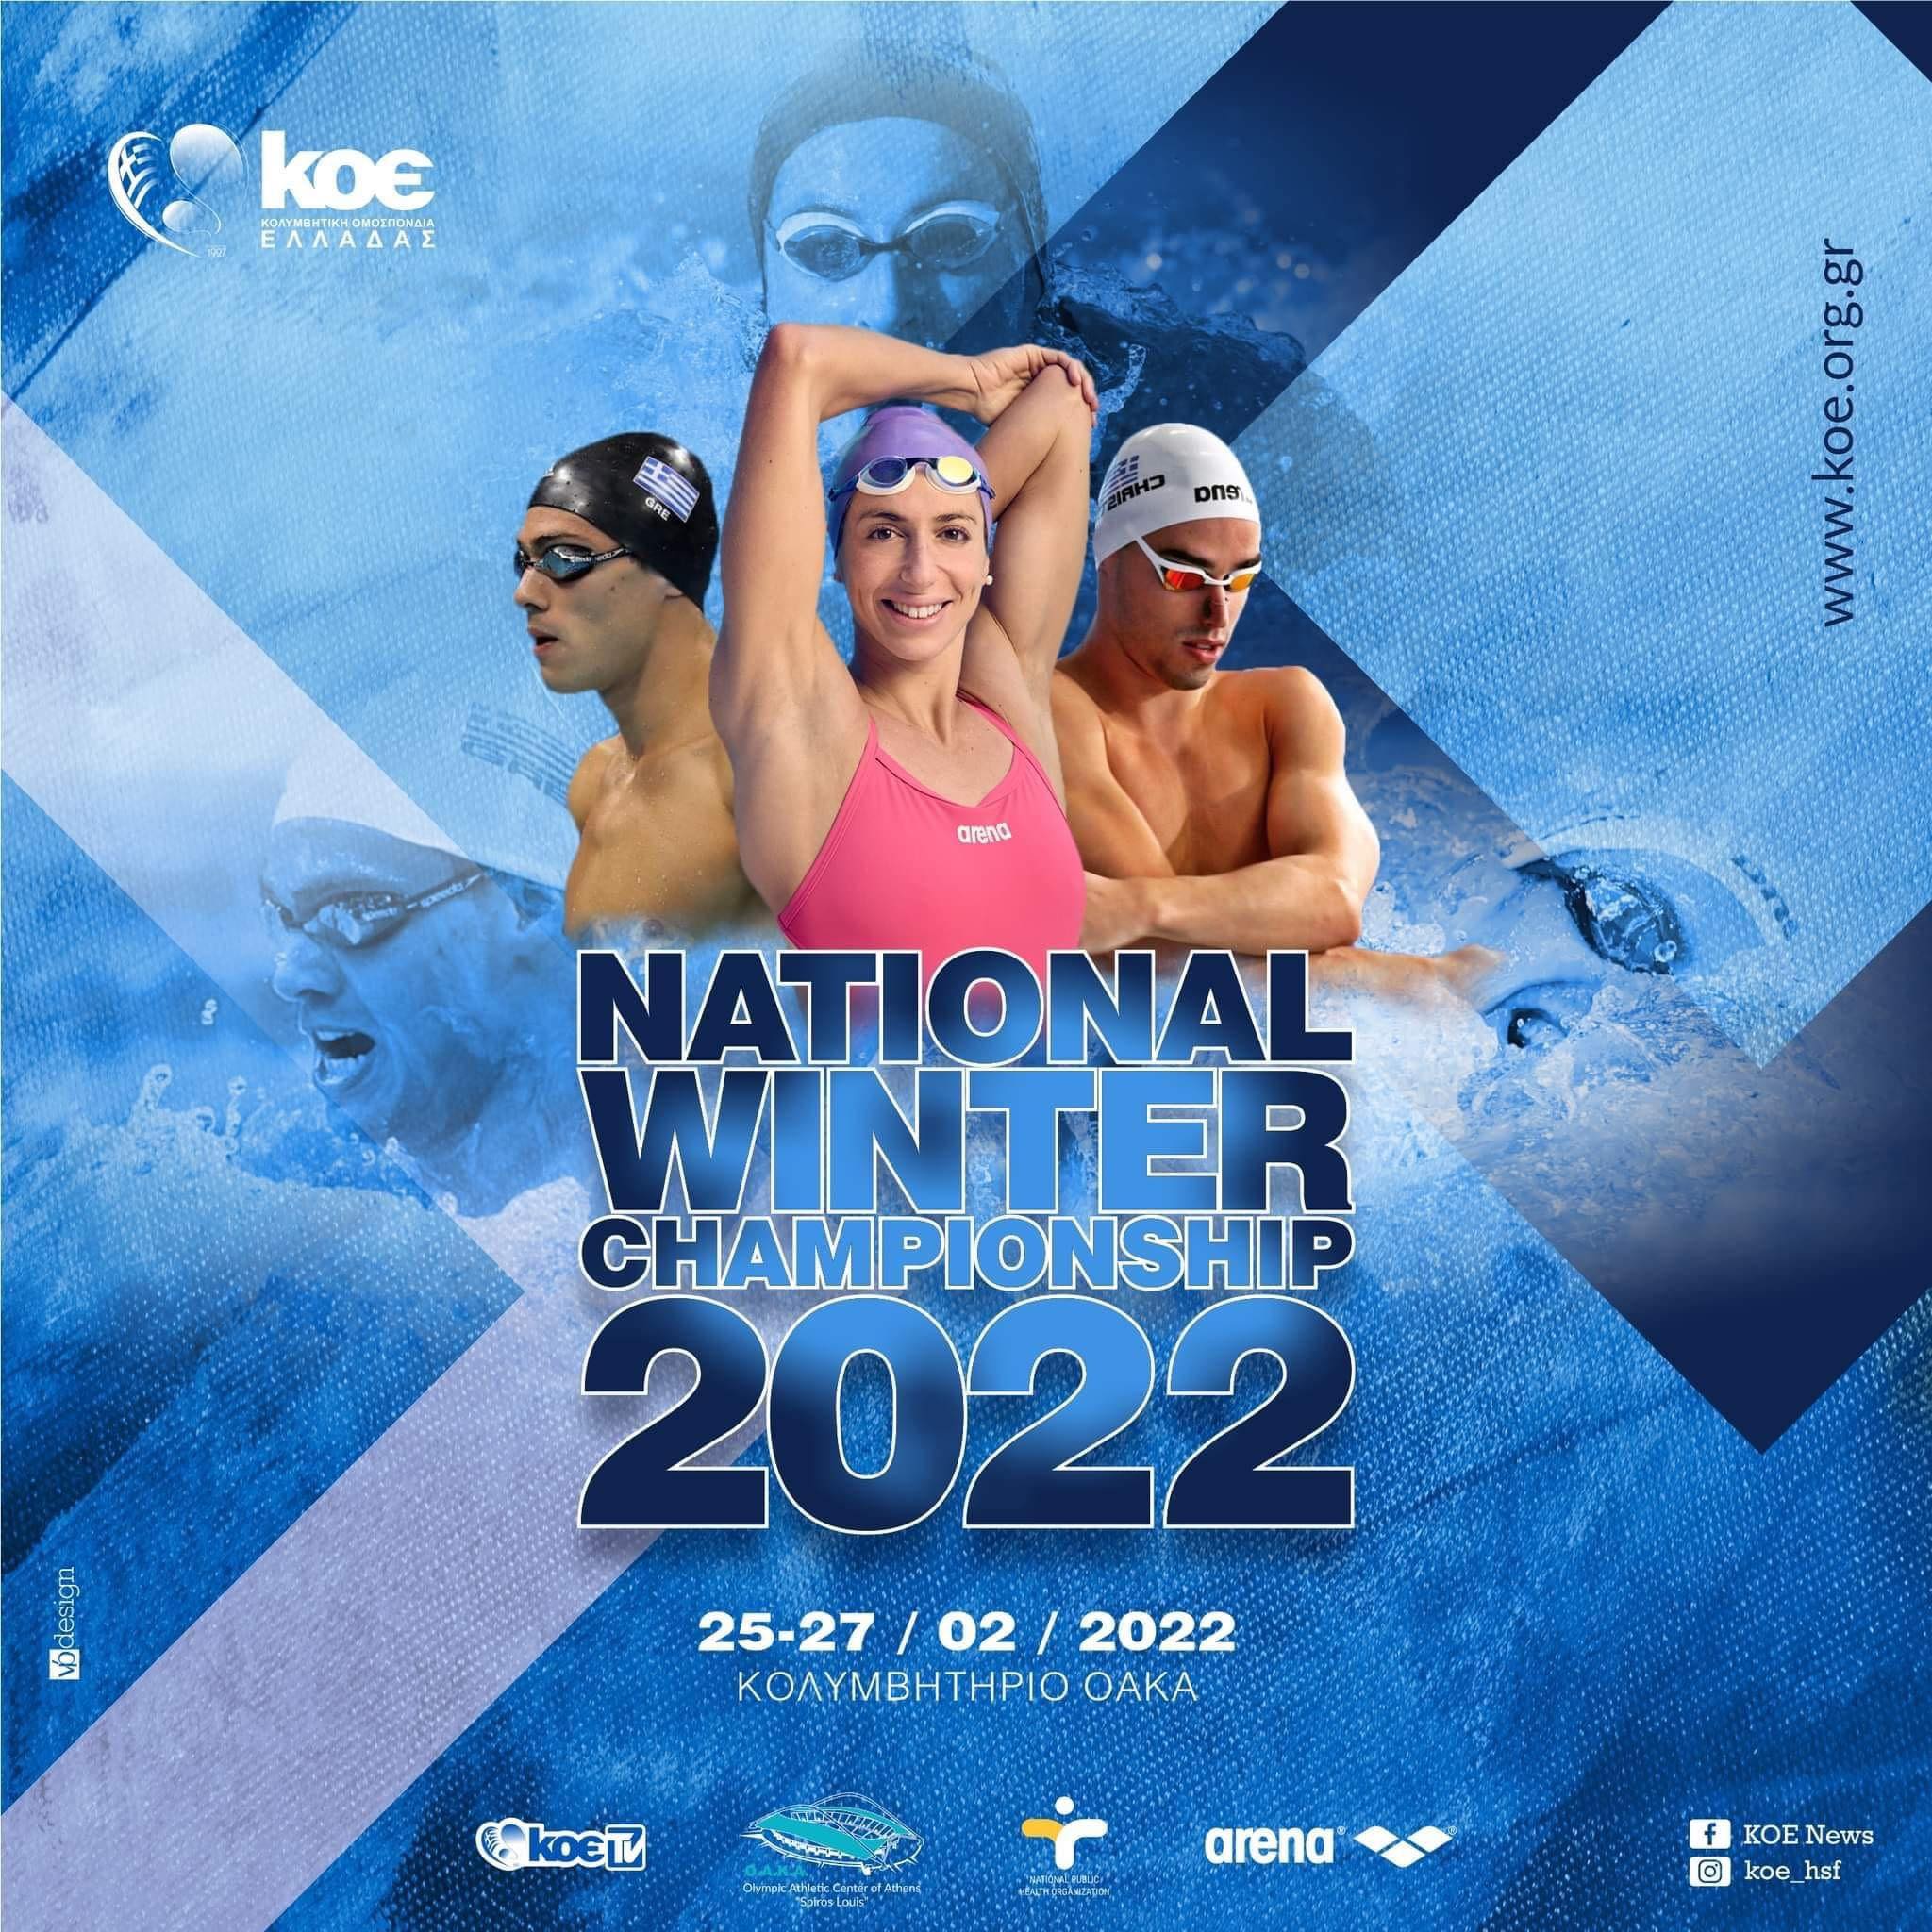 The Deree Swim Academy will be participating in the 2022 Open National Winter Championship.